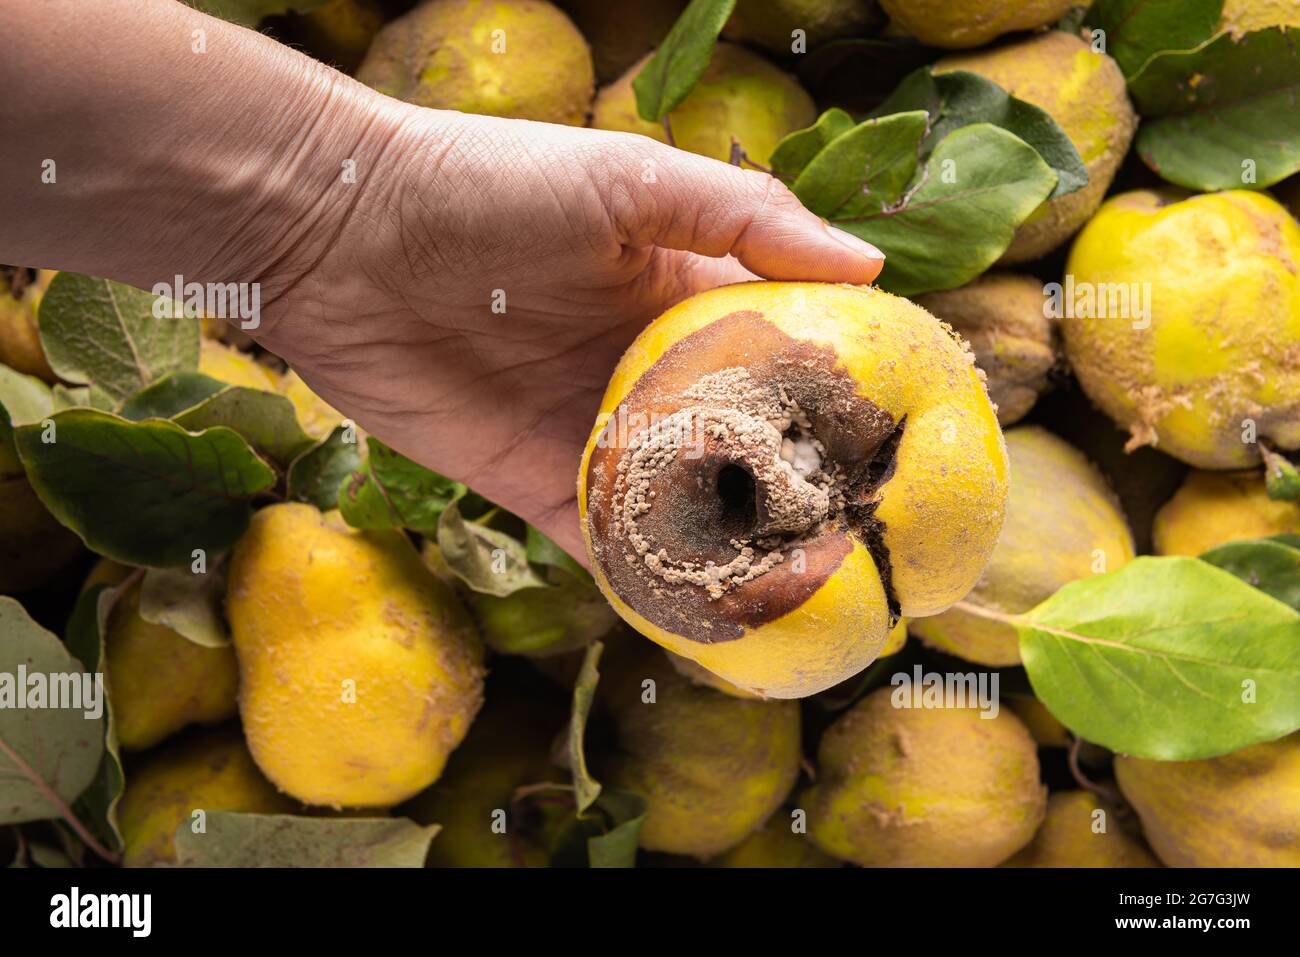 Close-up of large ugly rotted yellow quince apple in hand of farmer. Large group of quince apples with green leaves at background. View from above. Wa Stock Photo